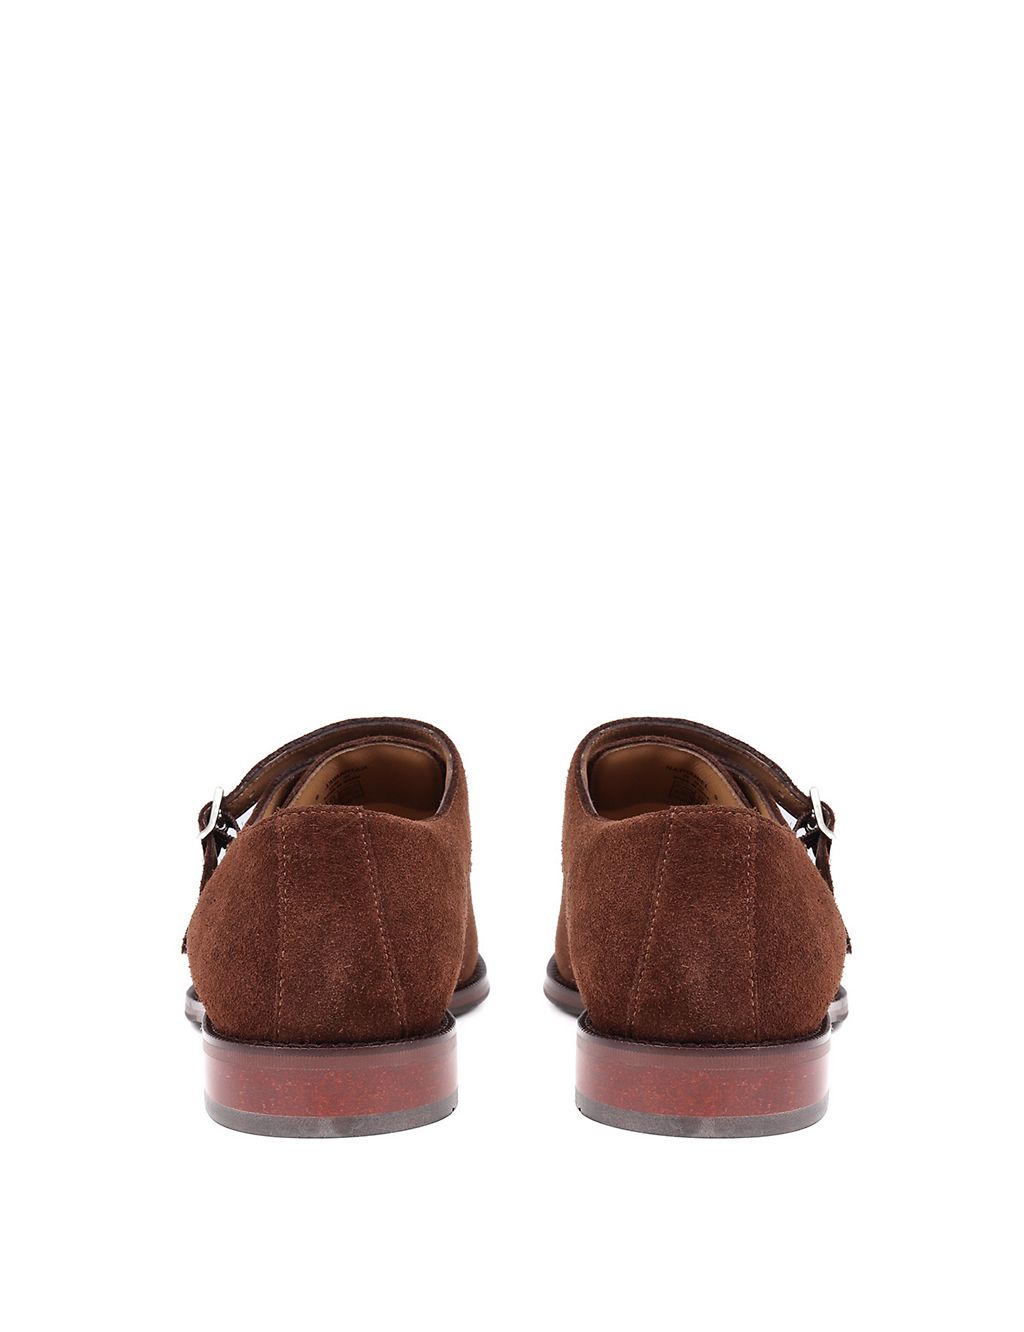 Suede Double Monk Strap Shoes 4 of 7